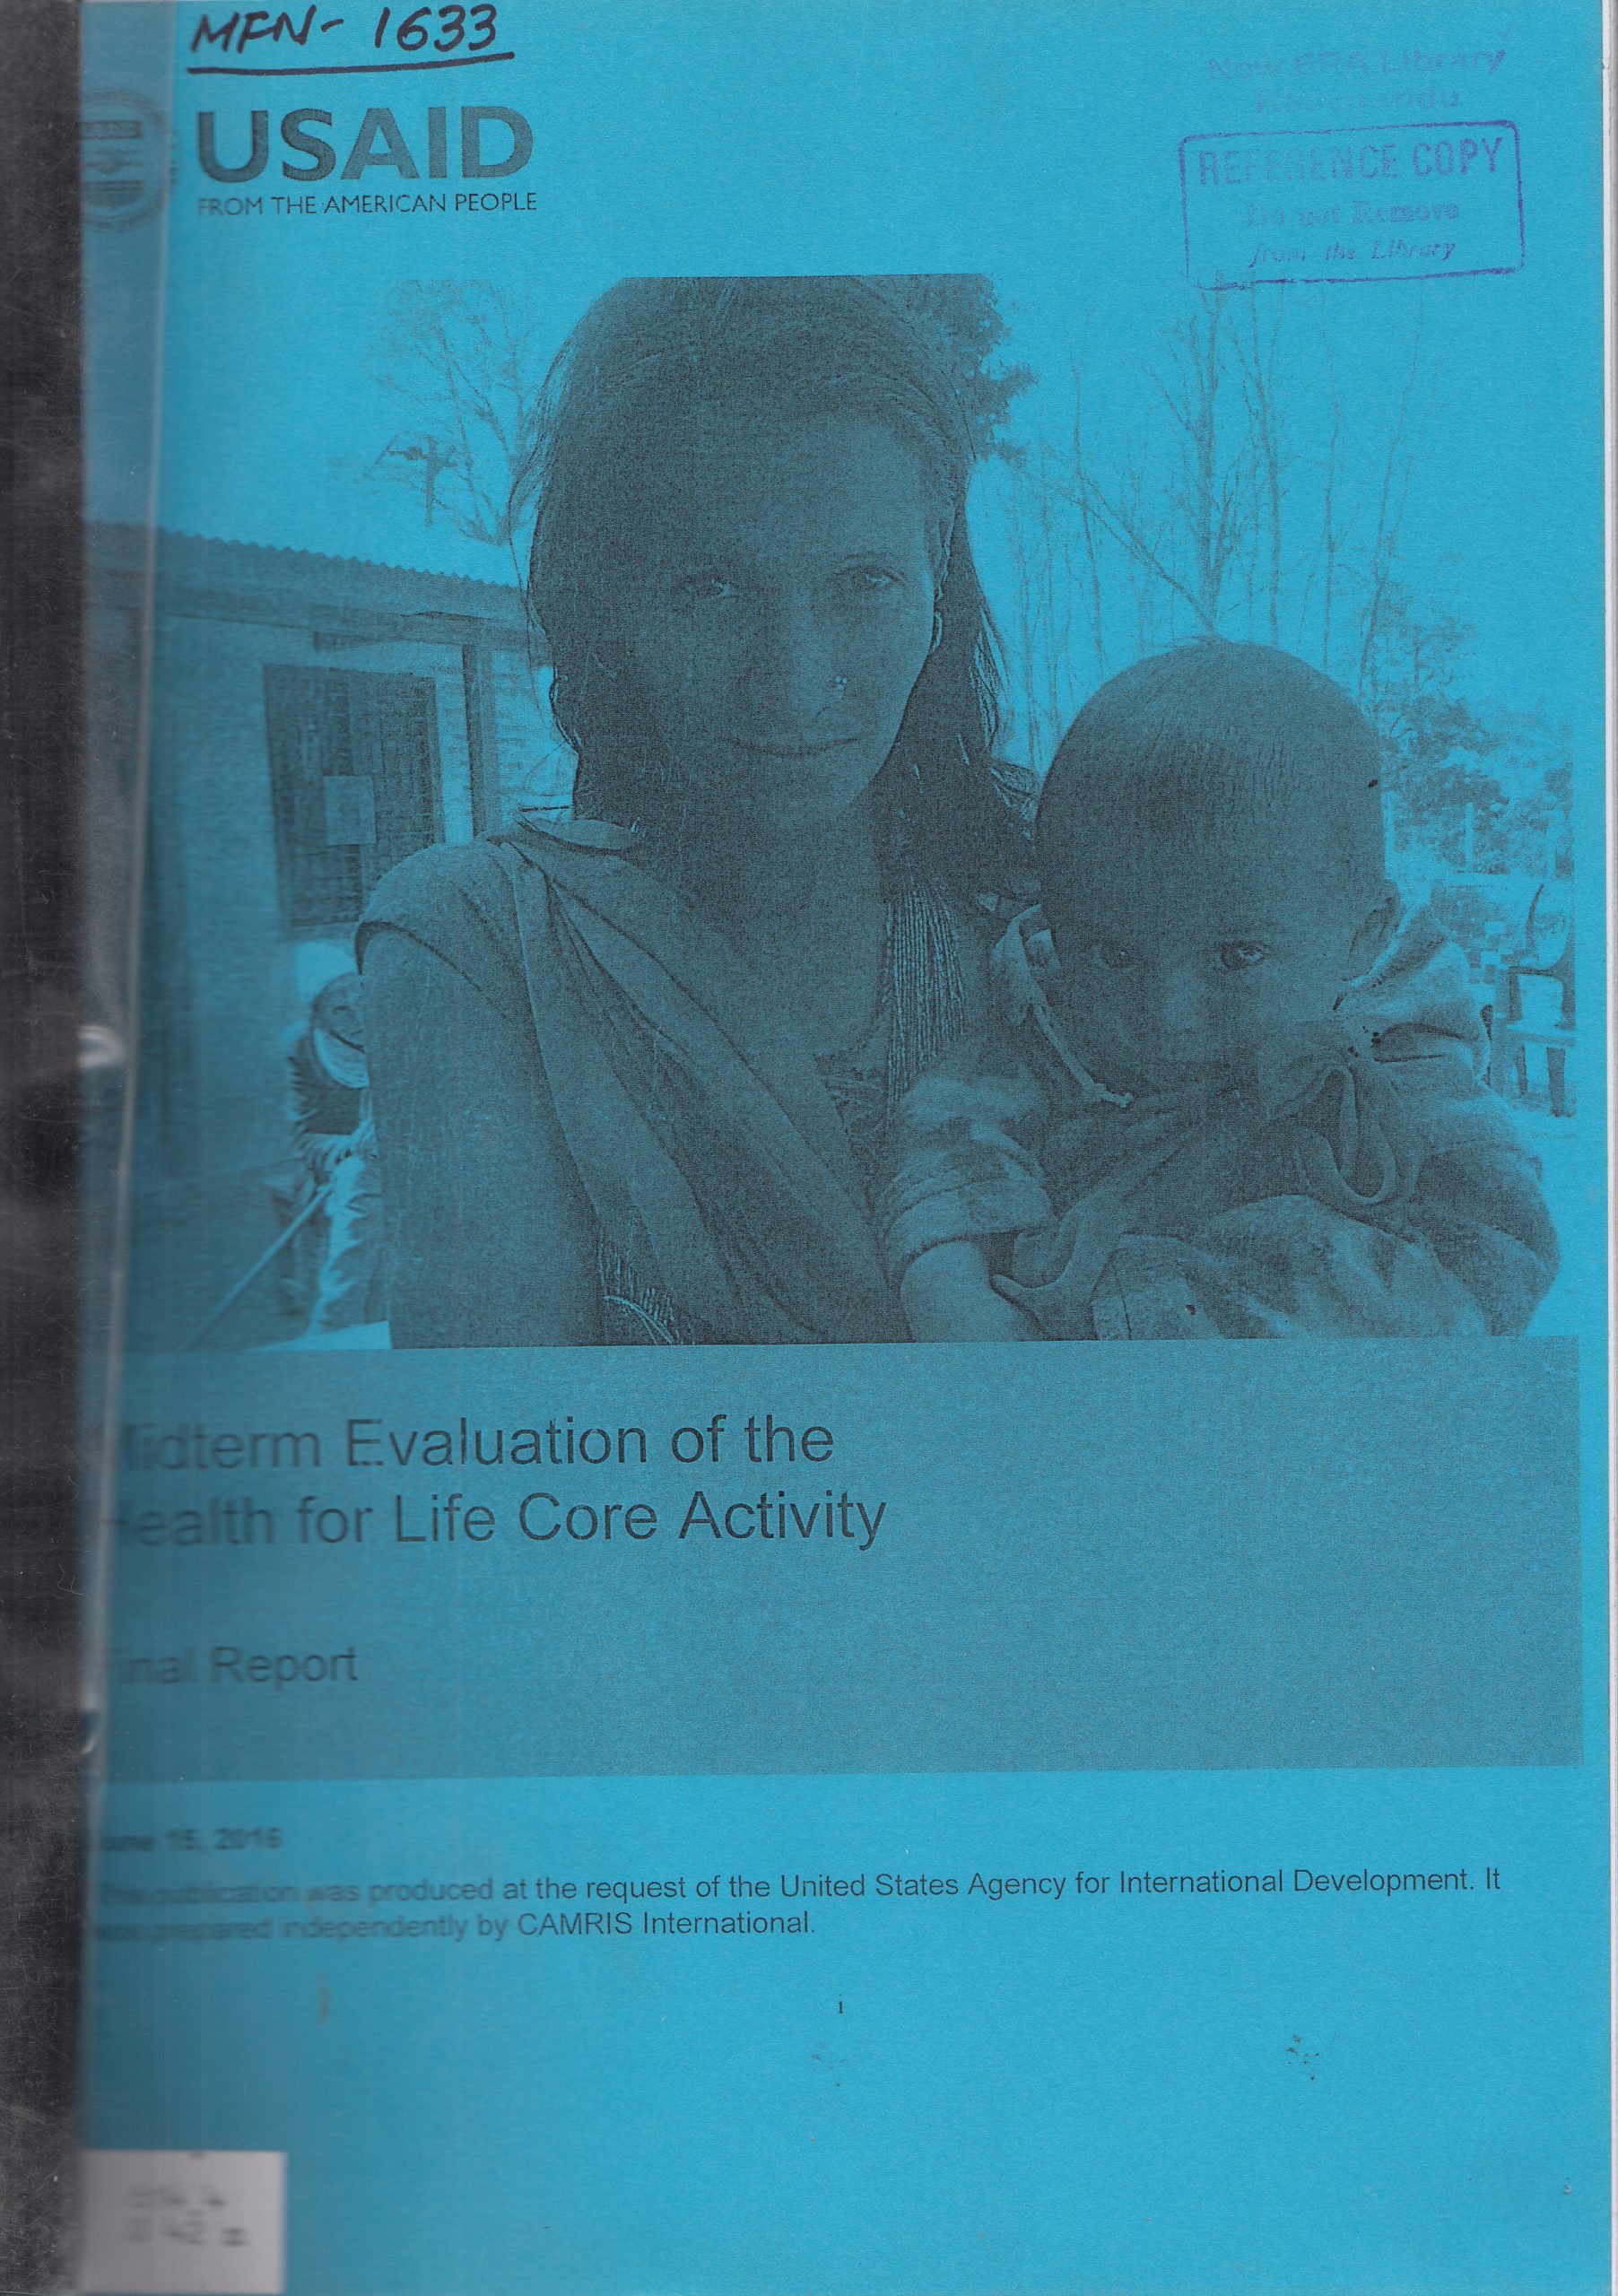 Mid Term Evaluation of the Health for Life Core Activity